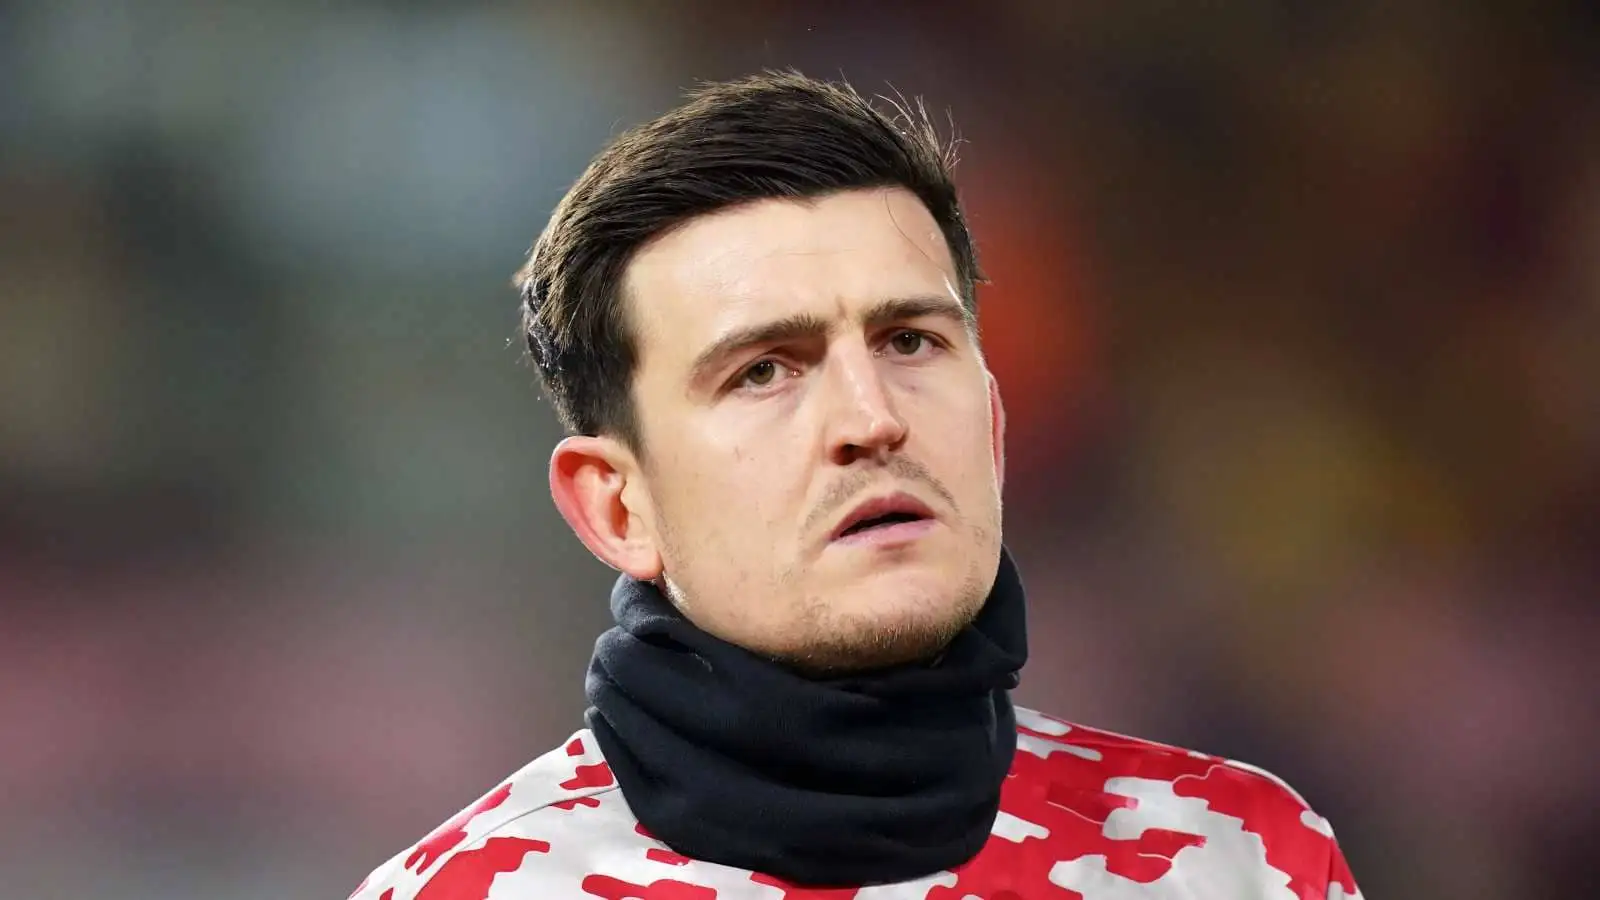 Harry Maguire during Man Utd warm-up